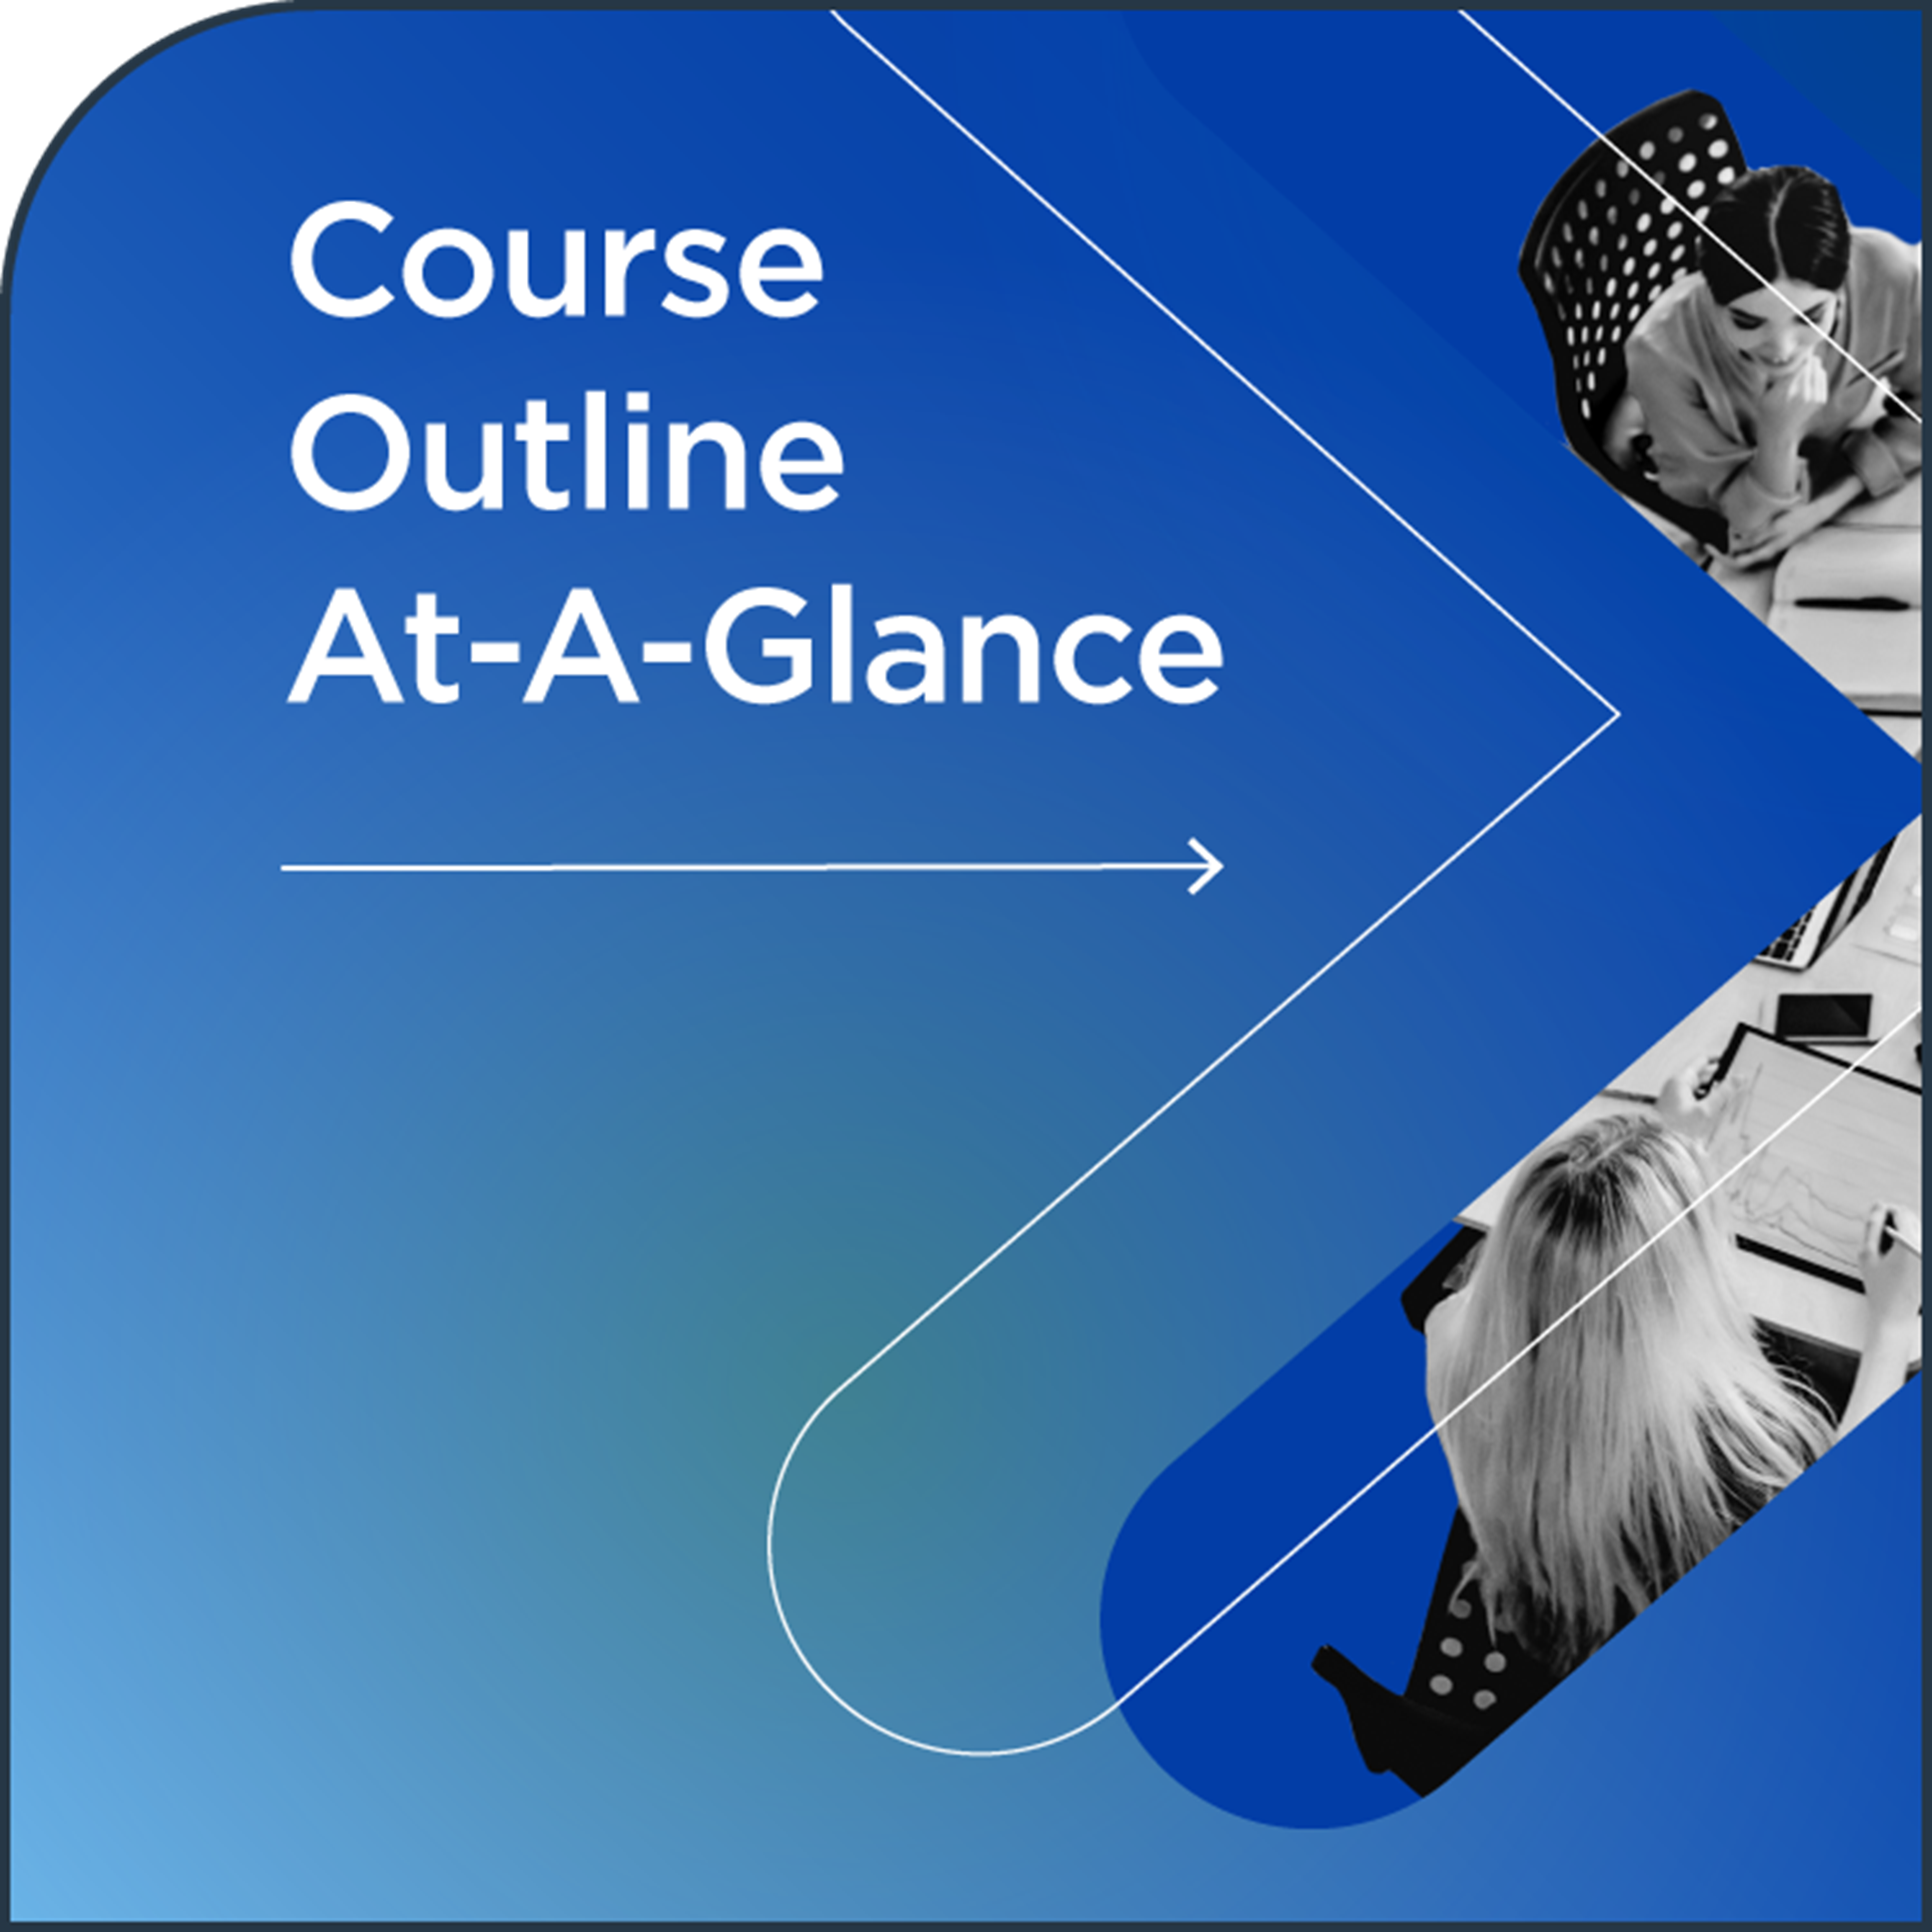 Course Outline At-A-Glance